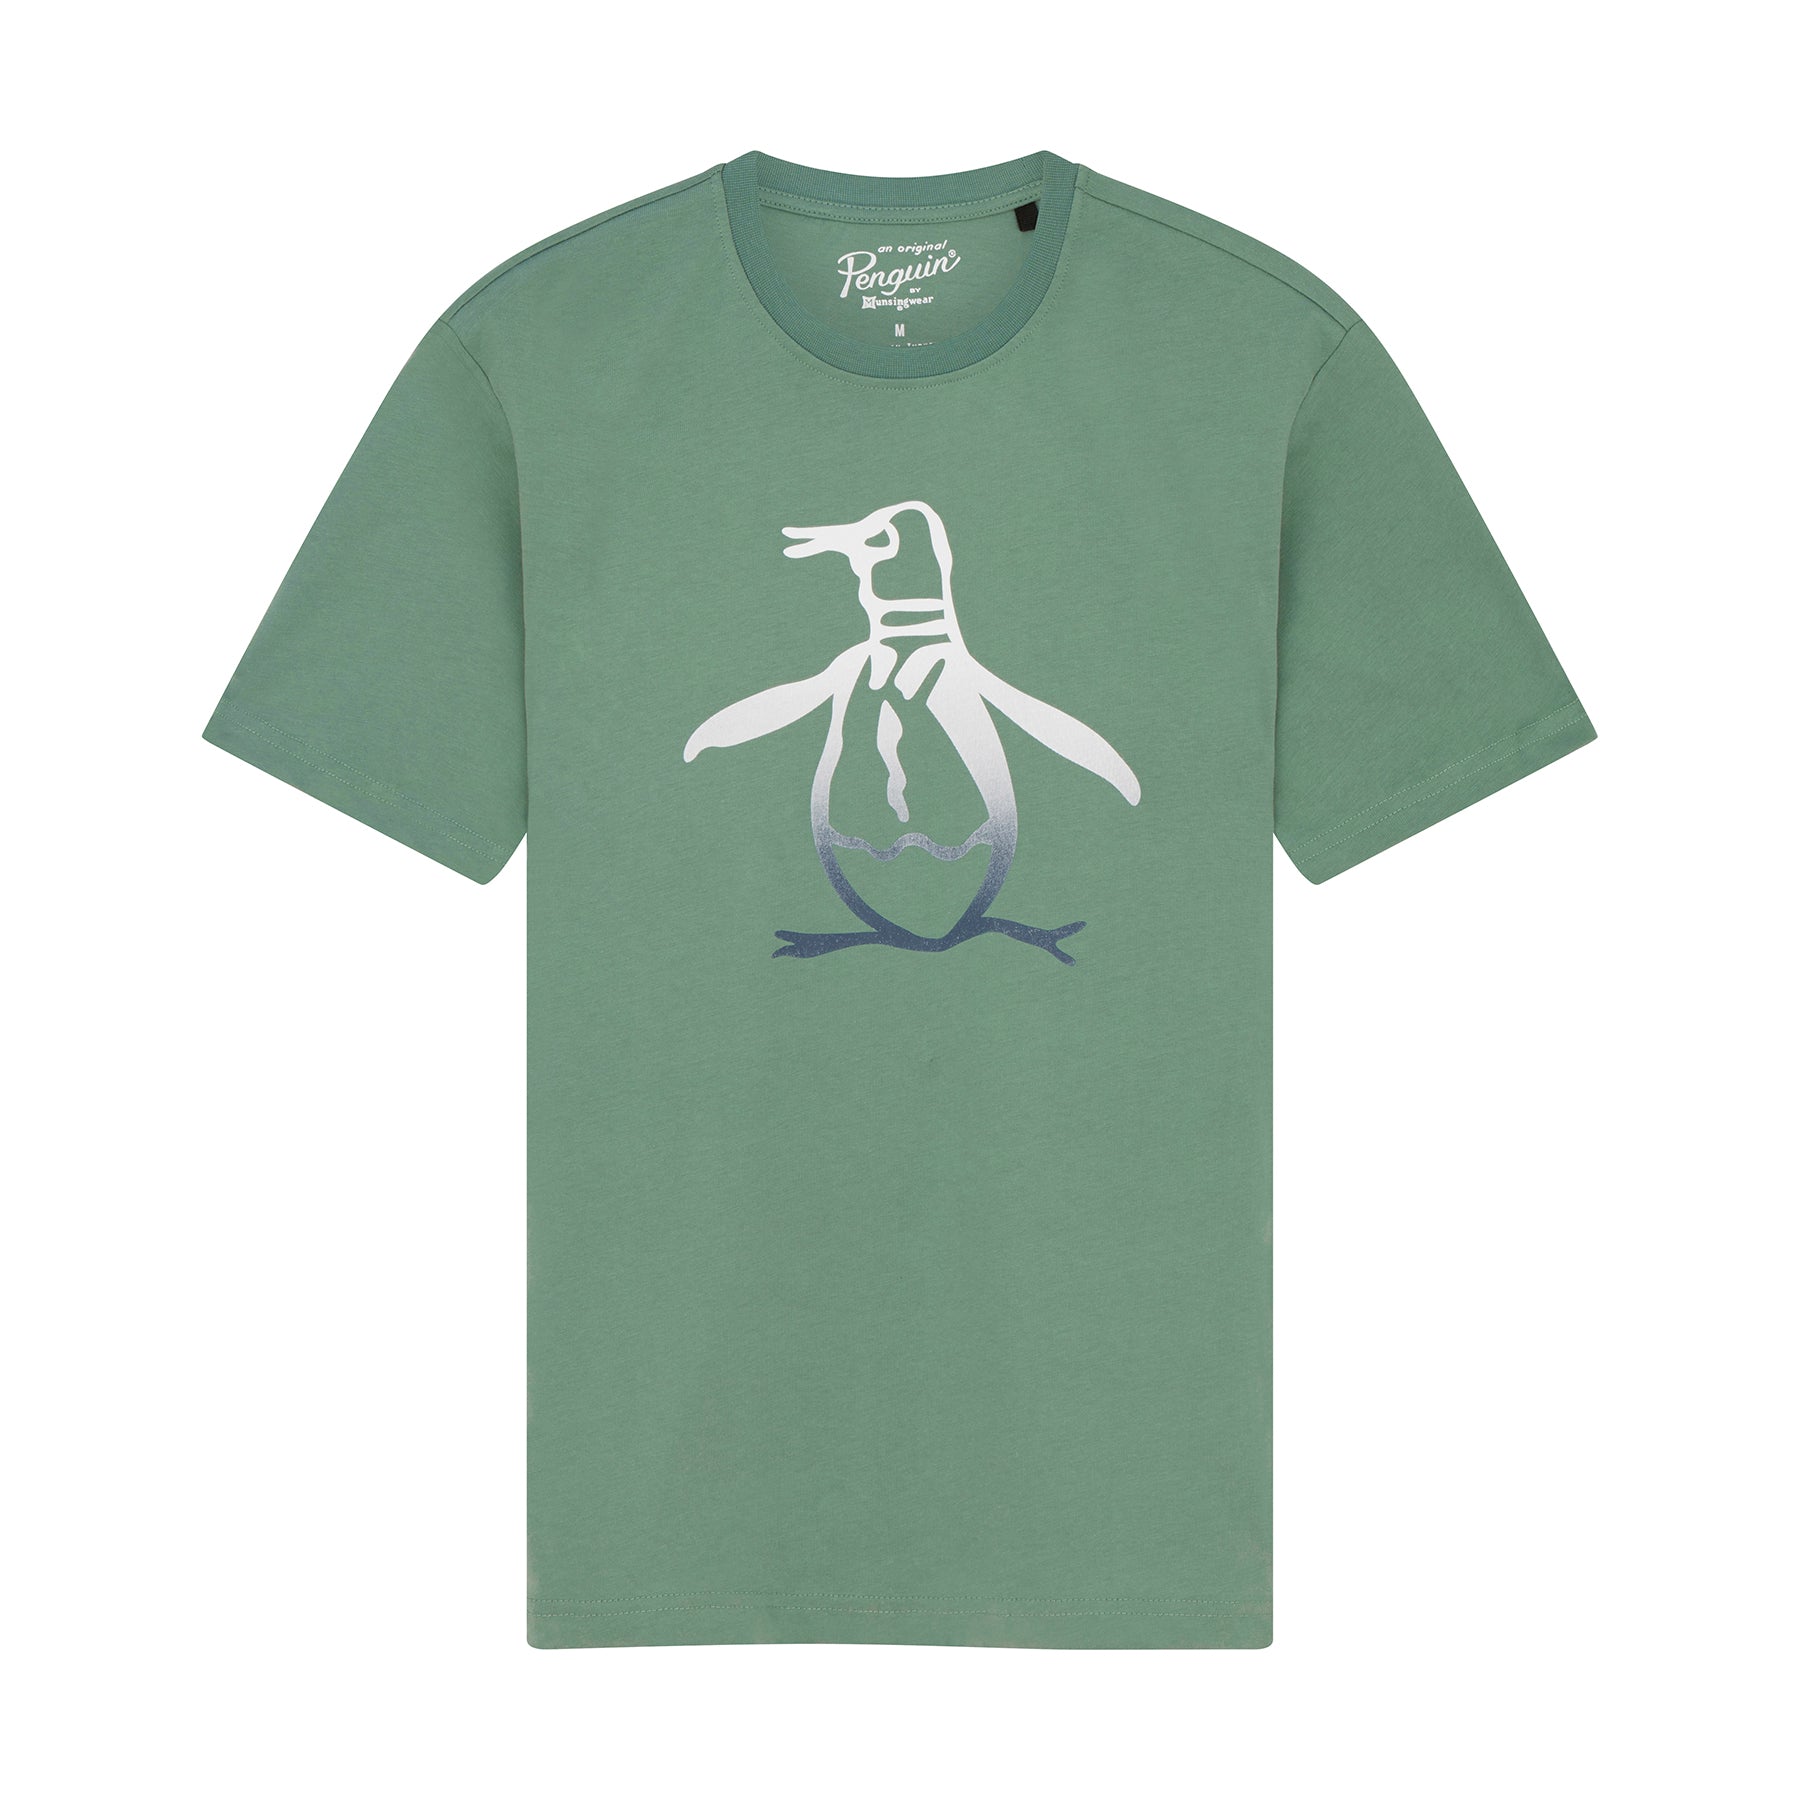 View Ombre Pete TShirt In Sagebrush Green information